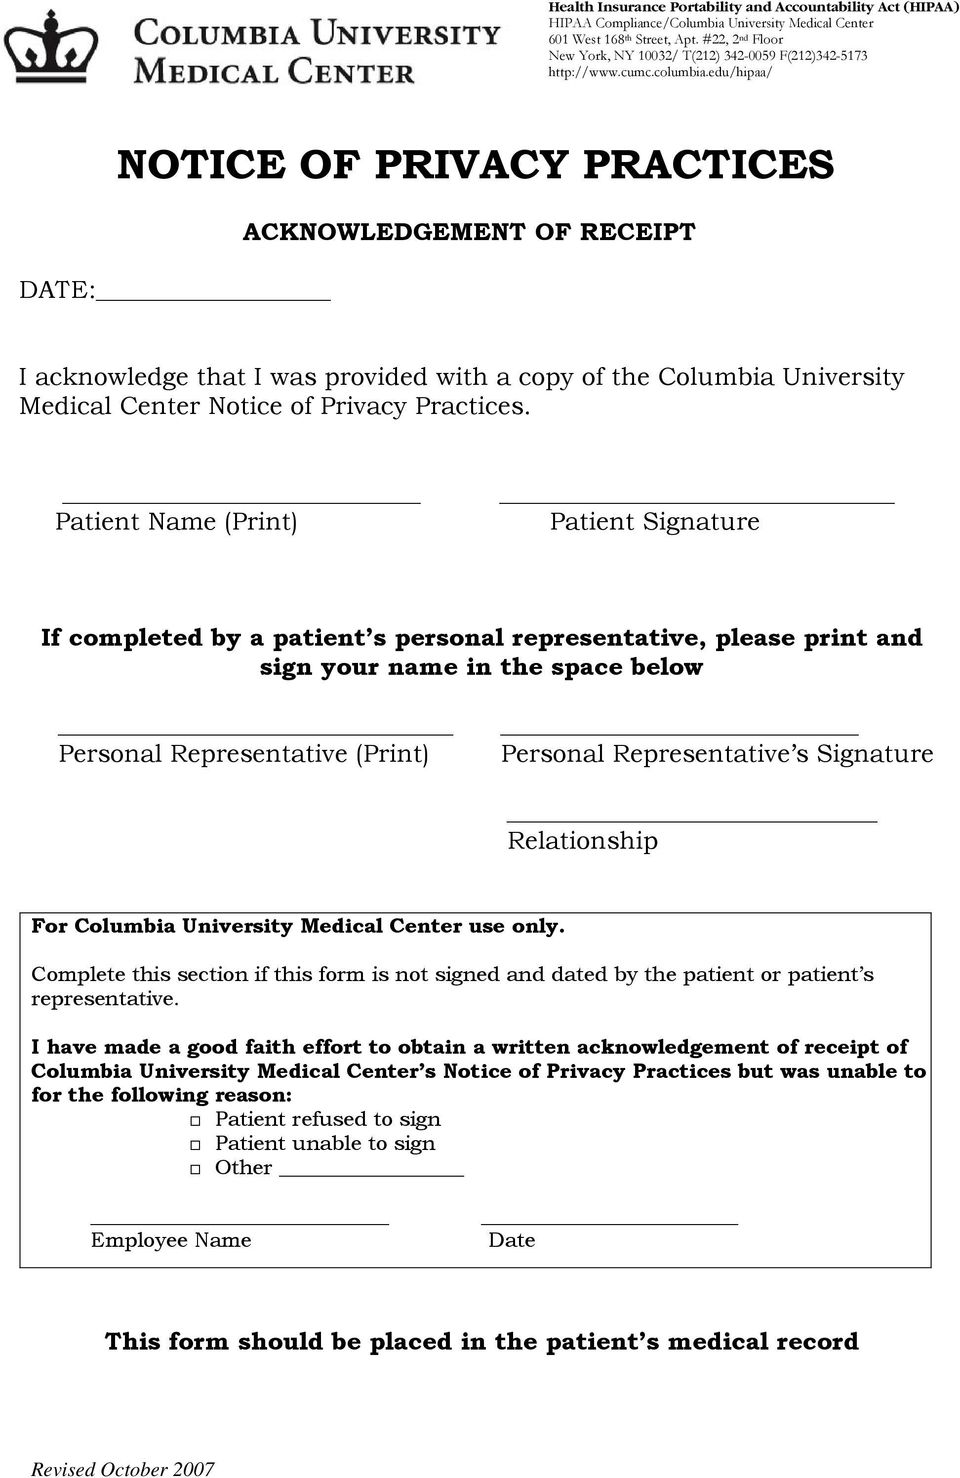 edu/hipaa/ NOTICE OF PRIVACY PRACTICES DATE: ACKNOWLEDGEMENT OF RECEIPT I acknowledge that I was provided with a copy of the Columbia University Medical Center Notice of Privacy Practices.